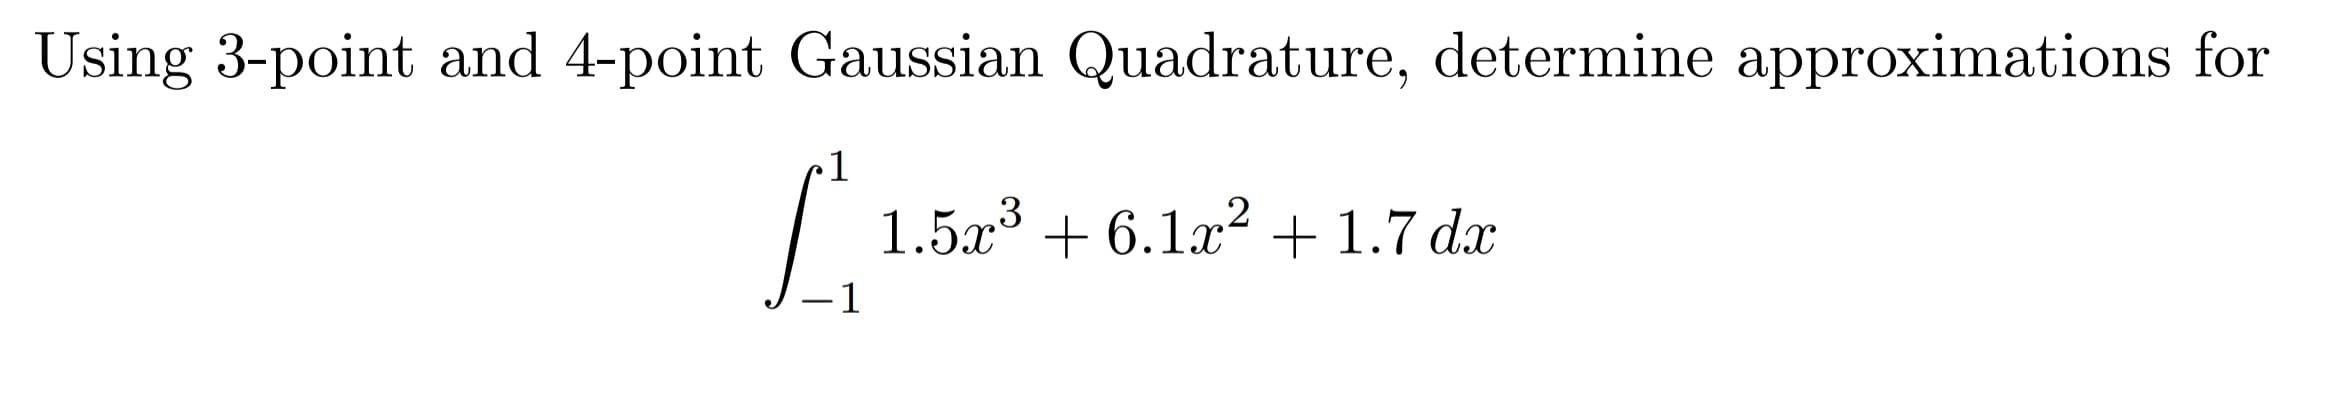 Using 3-point and 4-point Gaussian Quadrature, determine approximations for
1
1.5a3 6.12+1.7 dx
1
